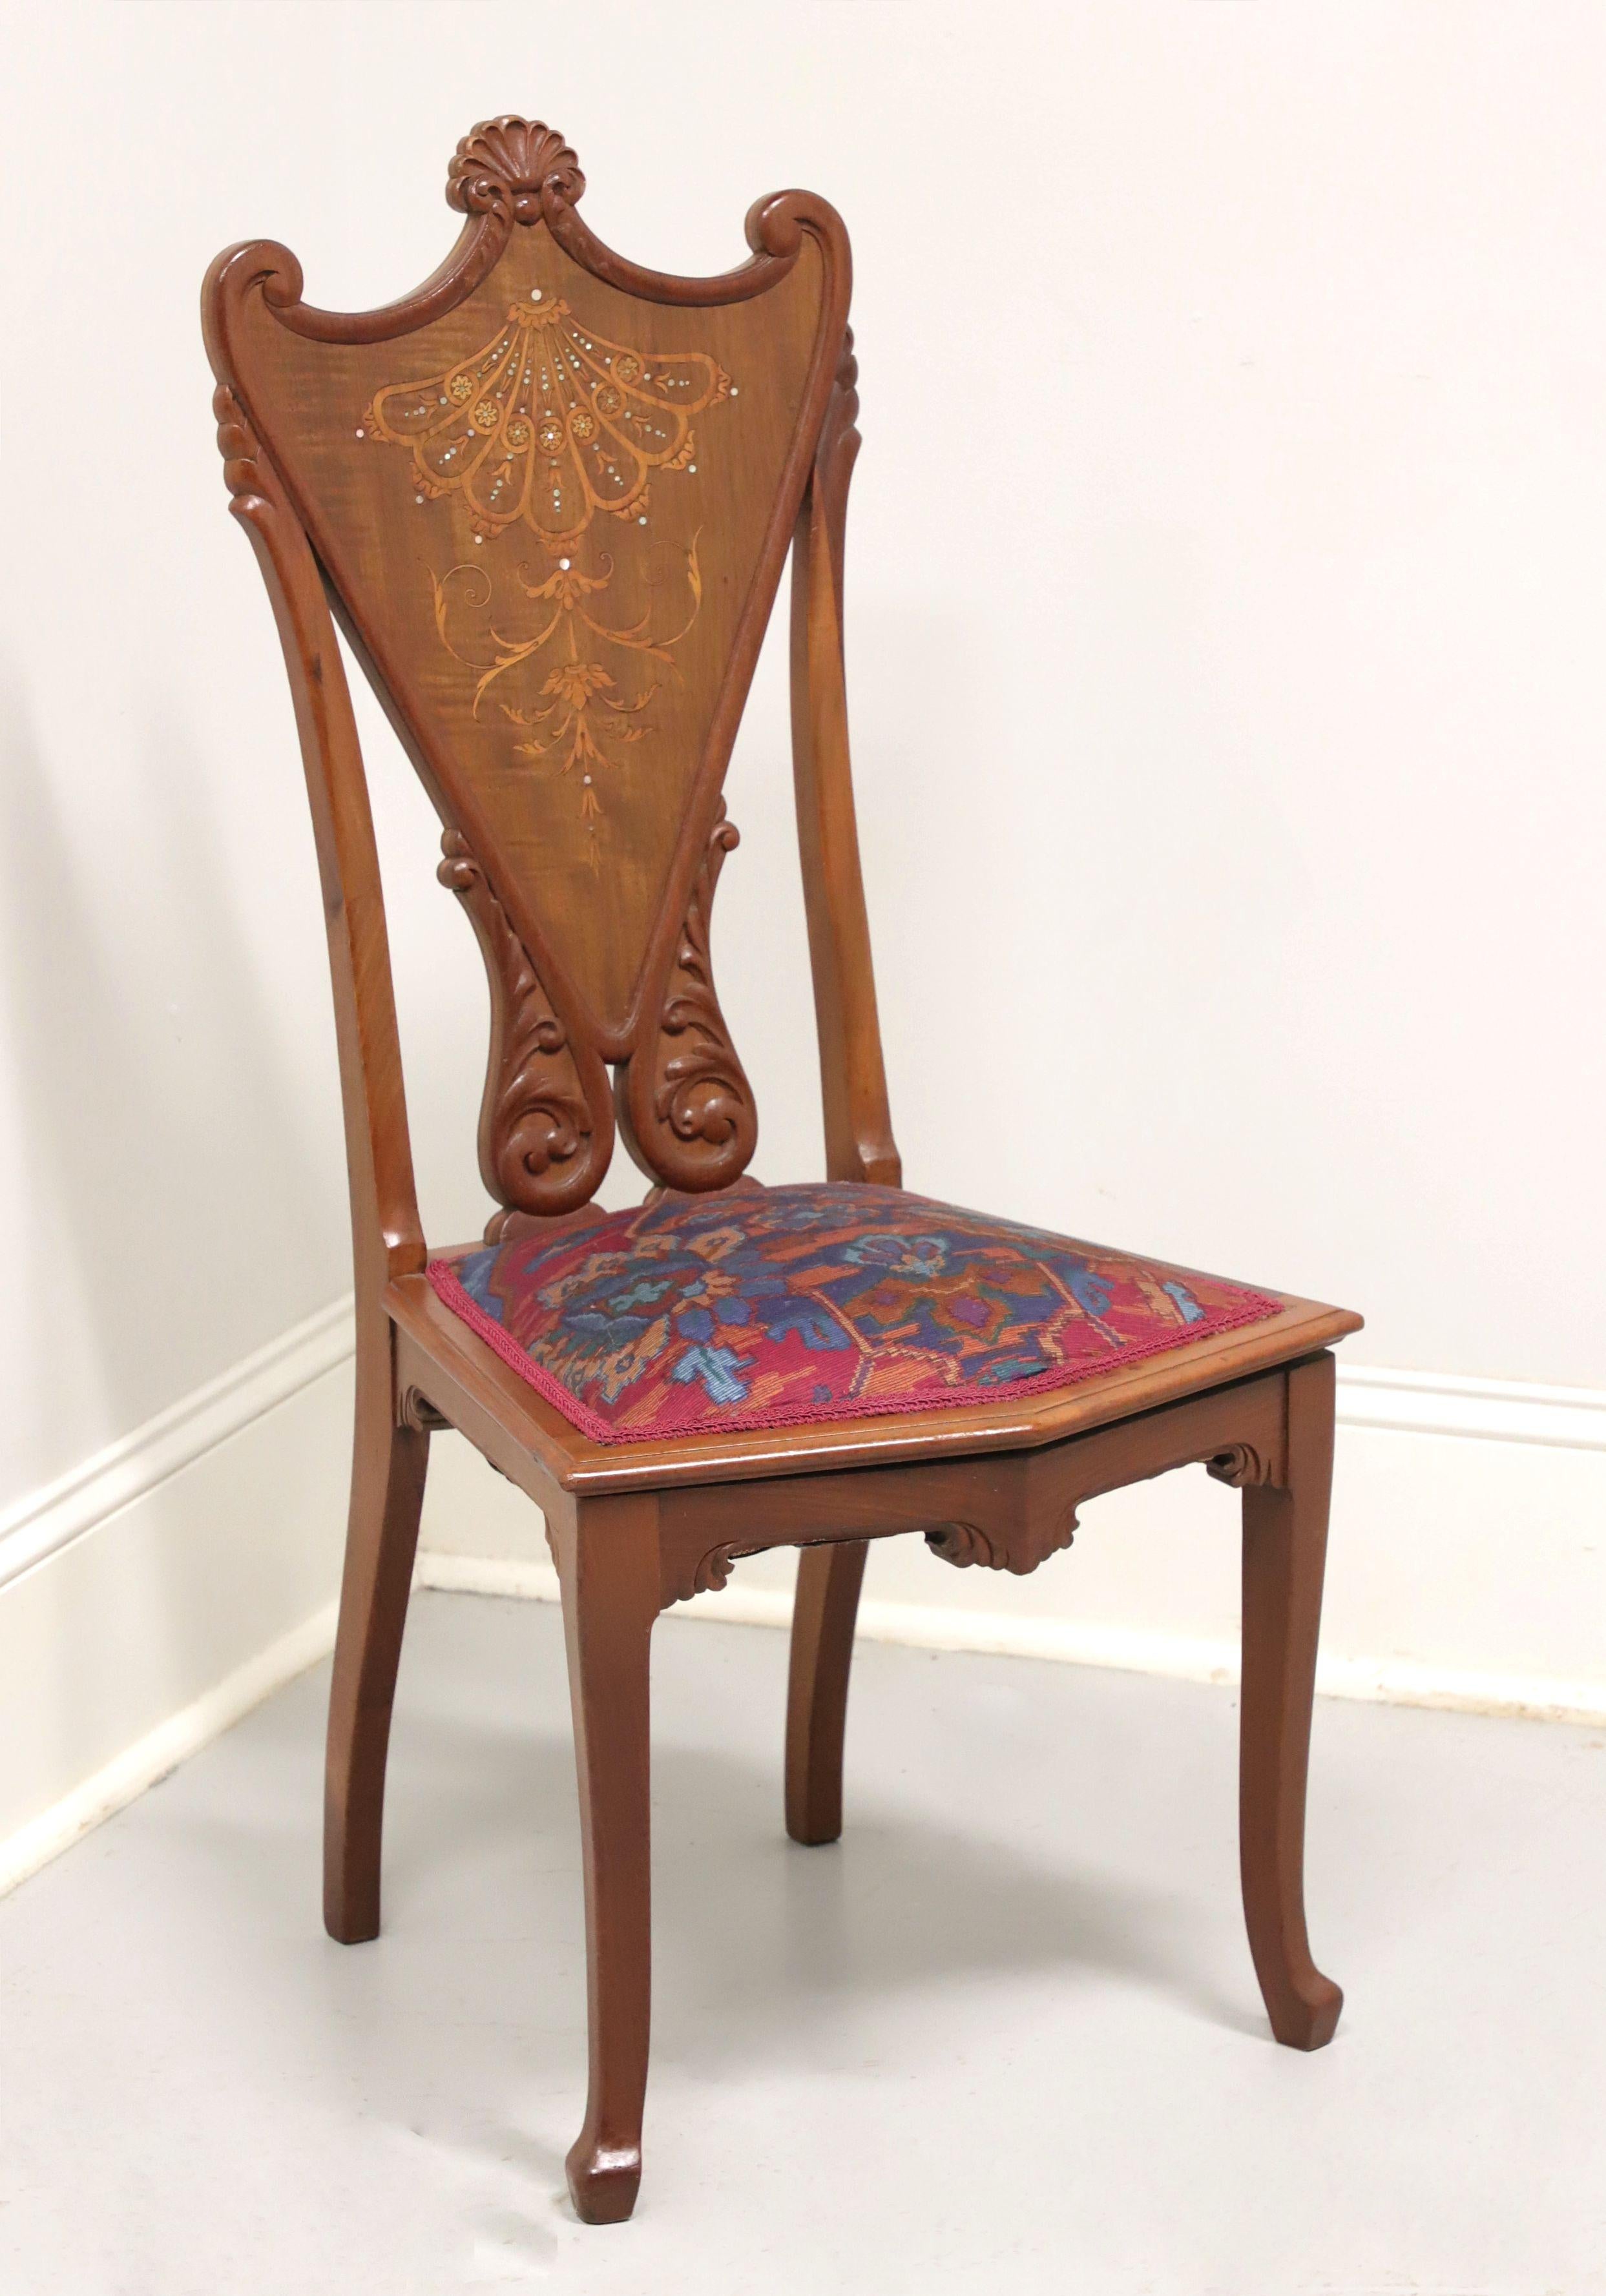 19th Century Carved Walnut Victorian Marquetry Chair with Mother of Pearl Inlay For Sale 3